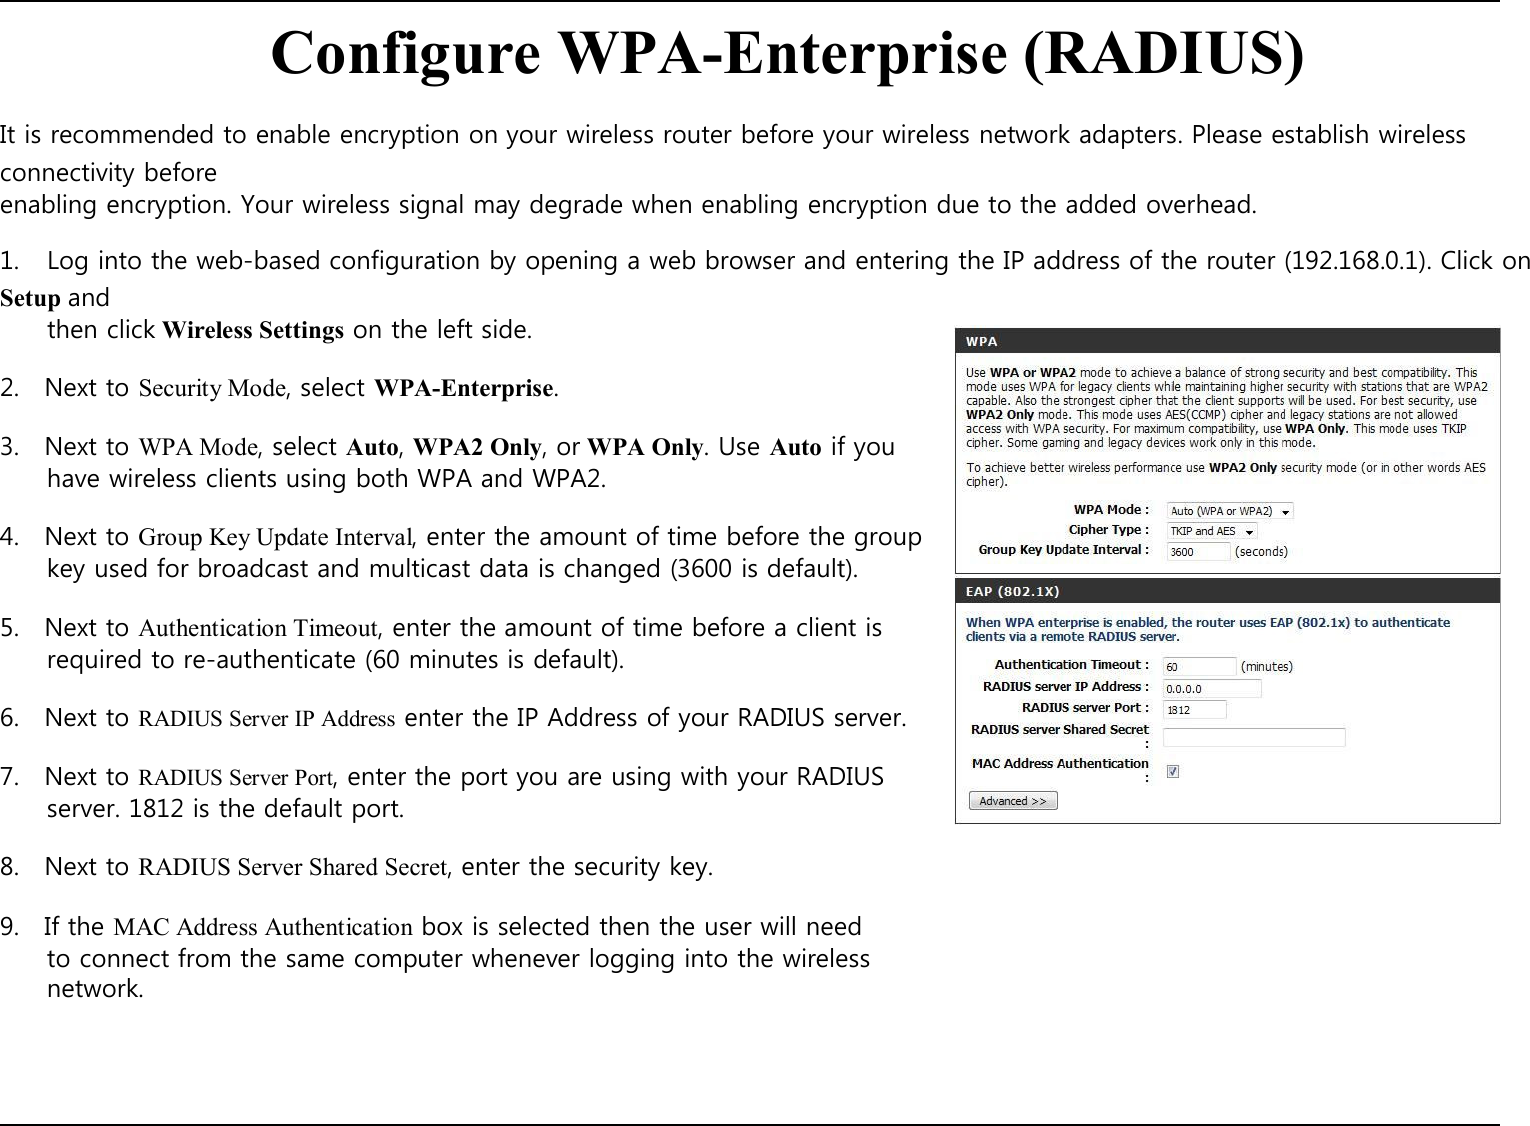    Configure WPA-Enterprise (RADIUS)  It is recommended to enable encryption on your wireless router before your wireless network adapters. Please establish wireless connectivity before enabling encryption. Your wireless signal may degrade when enabling encryption due to the added overhead.  1.  Log into the web-based configuration by opening a web browser and entering the IP address of the router (192.168.0.1). Click on Setup and then click Wireless Settings on the left side.  2.    Next to Security Mode, select WPA-Enterprise.  3.    Next to WPA Mode, select Auto, WPA2 Only, or WPA Only. Use Auto if you have wireless clients using both WPA and WPA2.  4.    Next to Group Key Update Interval, enter the amount of time before the group key used for broadcast and multicast data is changed (3600 is default).  5.    Next to Authentication Timeout, enter the amount of time before a client is required to re-authenticate (60 minutes is default).  6.    Next to RADIUS Server IP Address enter the IP Address of your RADIUS server.  7.    Next to RADIUS Server Port, enter the port you are using with your RADIUS server. 1812 is the default port.  8.    Next to RADIUS Server Shared Secret, enter the security key.  9.    If the MAC Address Authentication box is selected then the user will need to connect from the same computer whenever logging into the wireless network.           